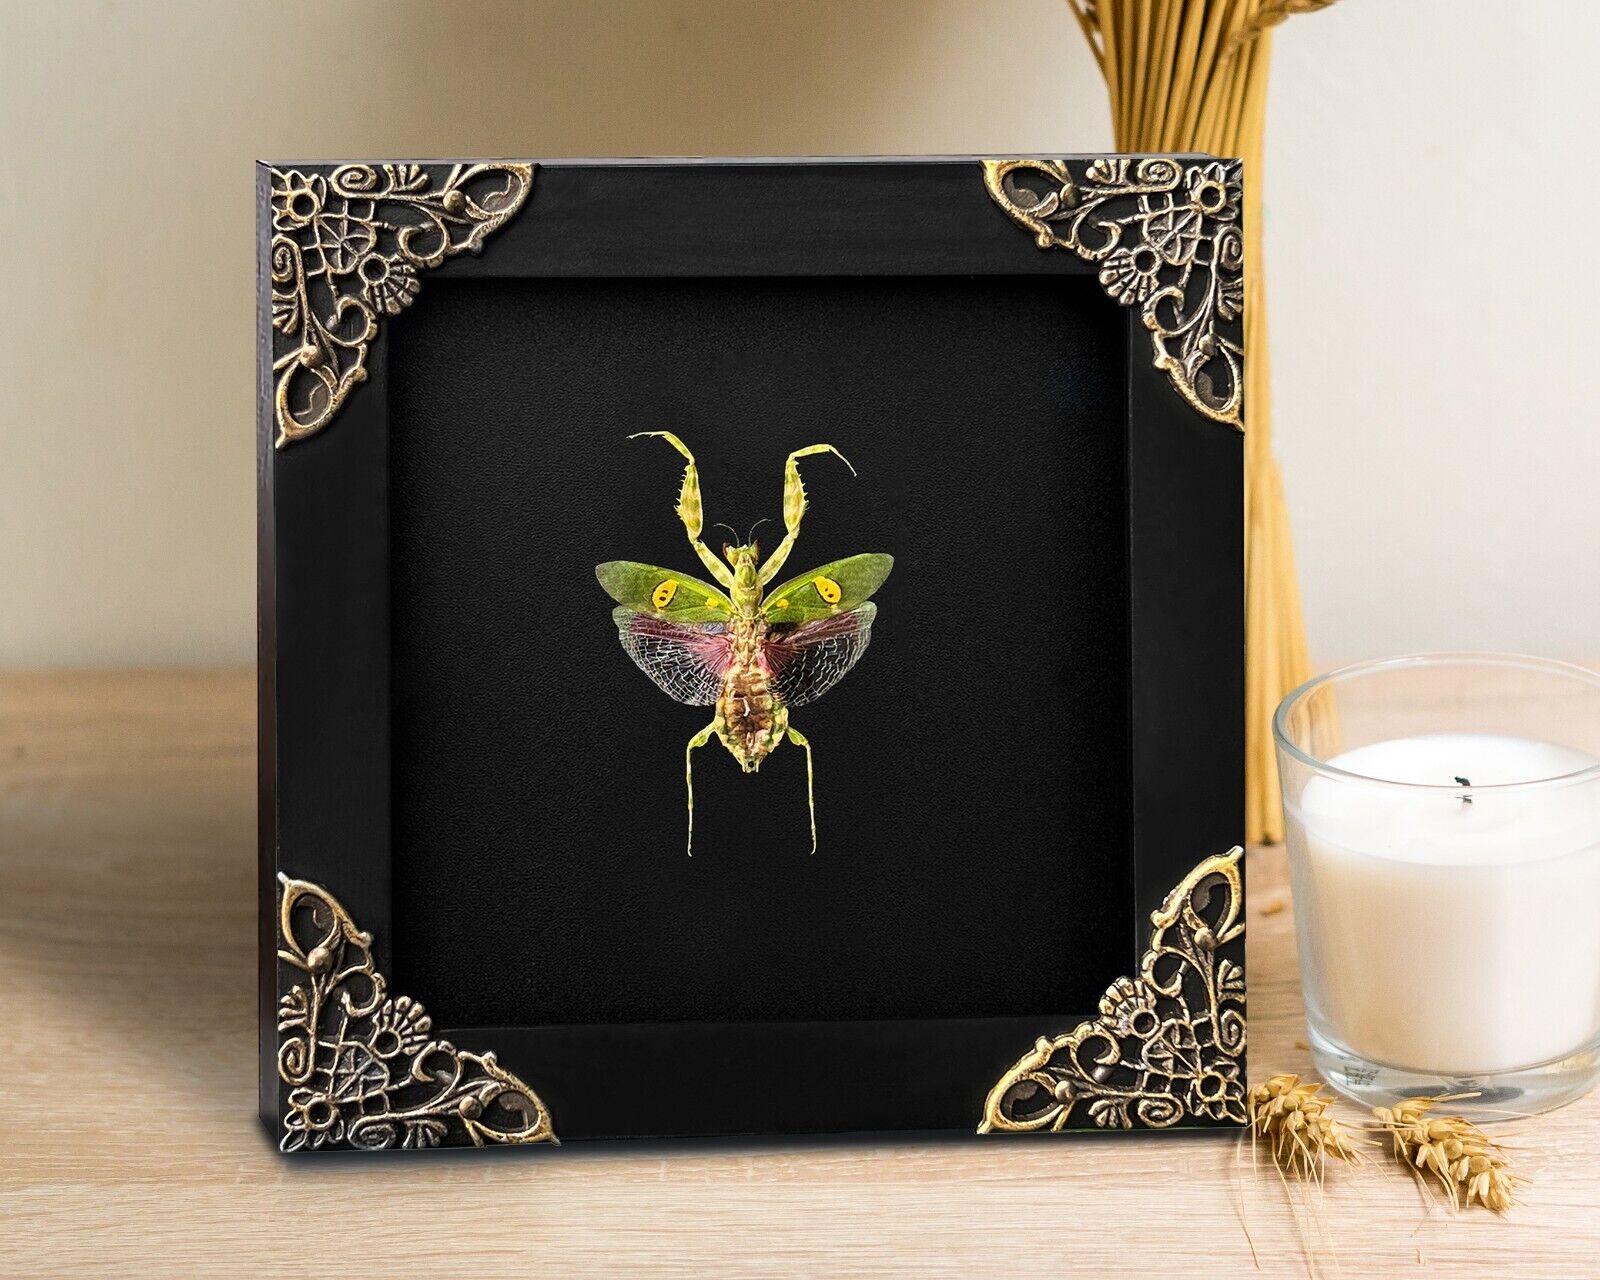 Real Jeweled Flower Mantis Open Wings Deep Display Shadow Box Gift For Friends